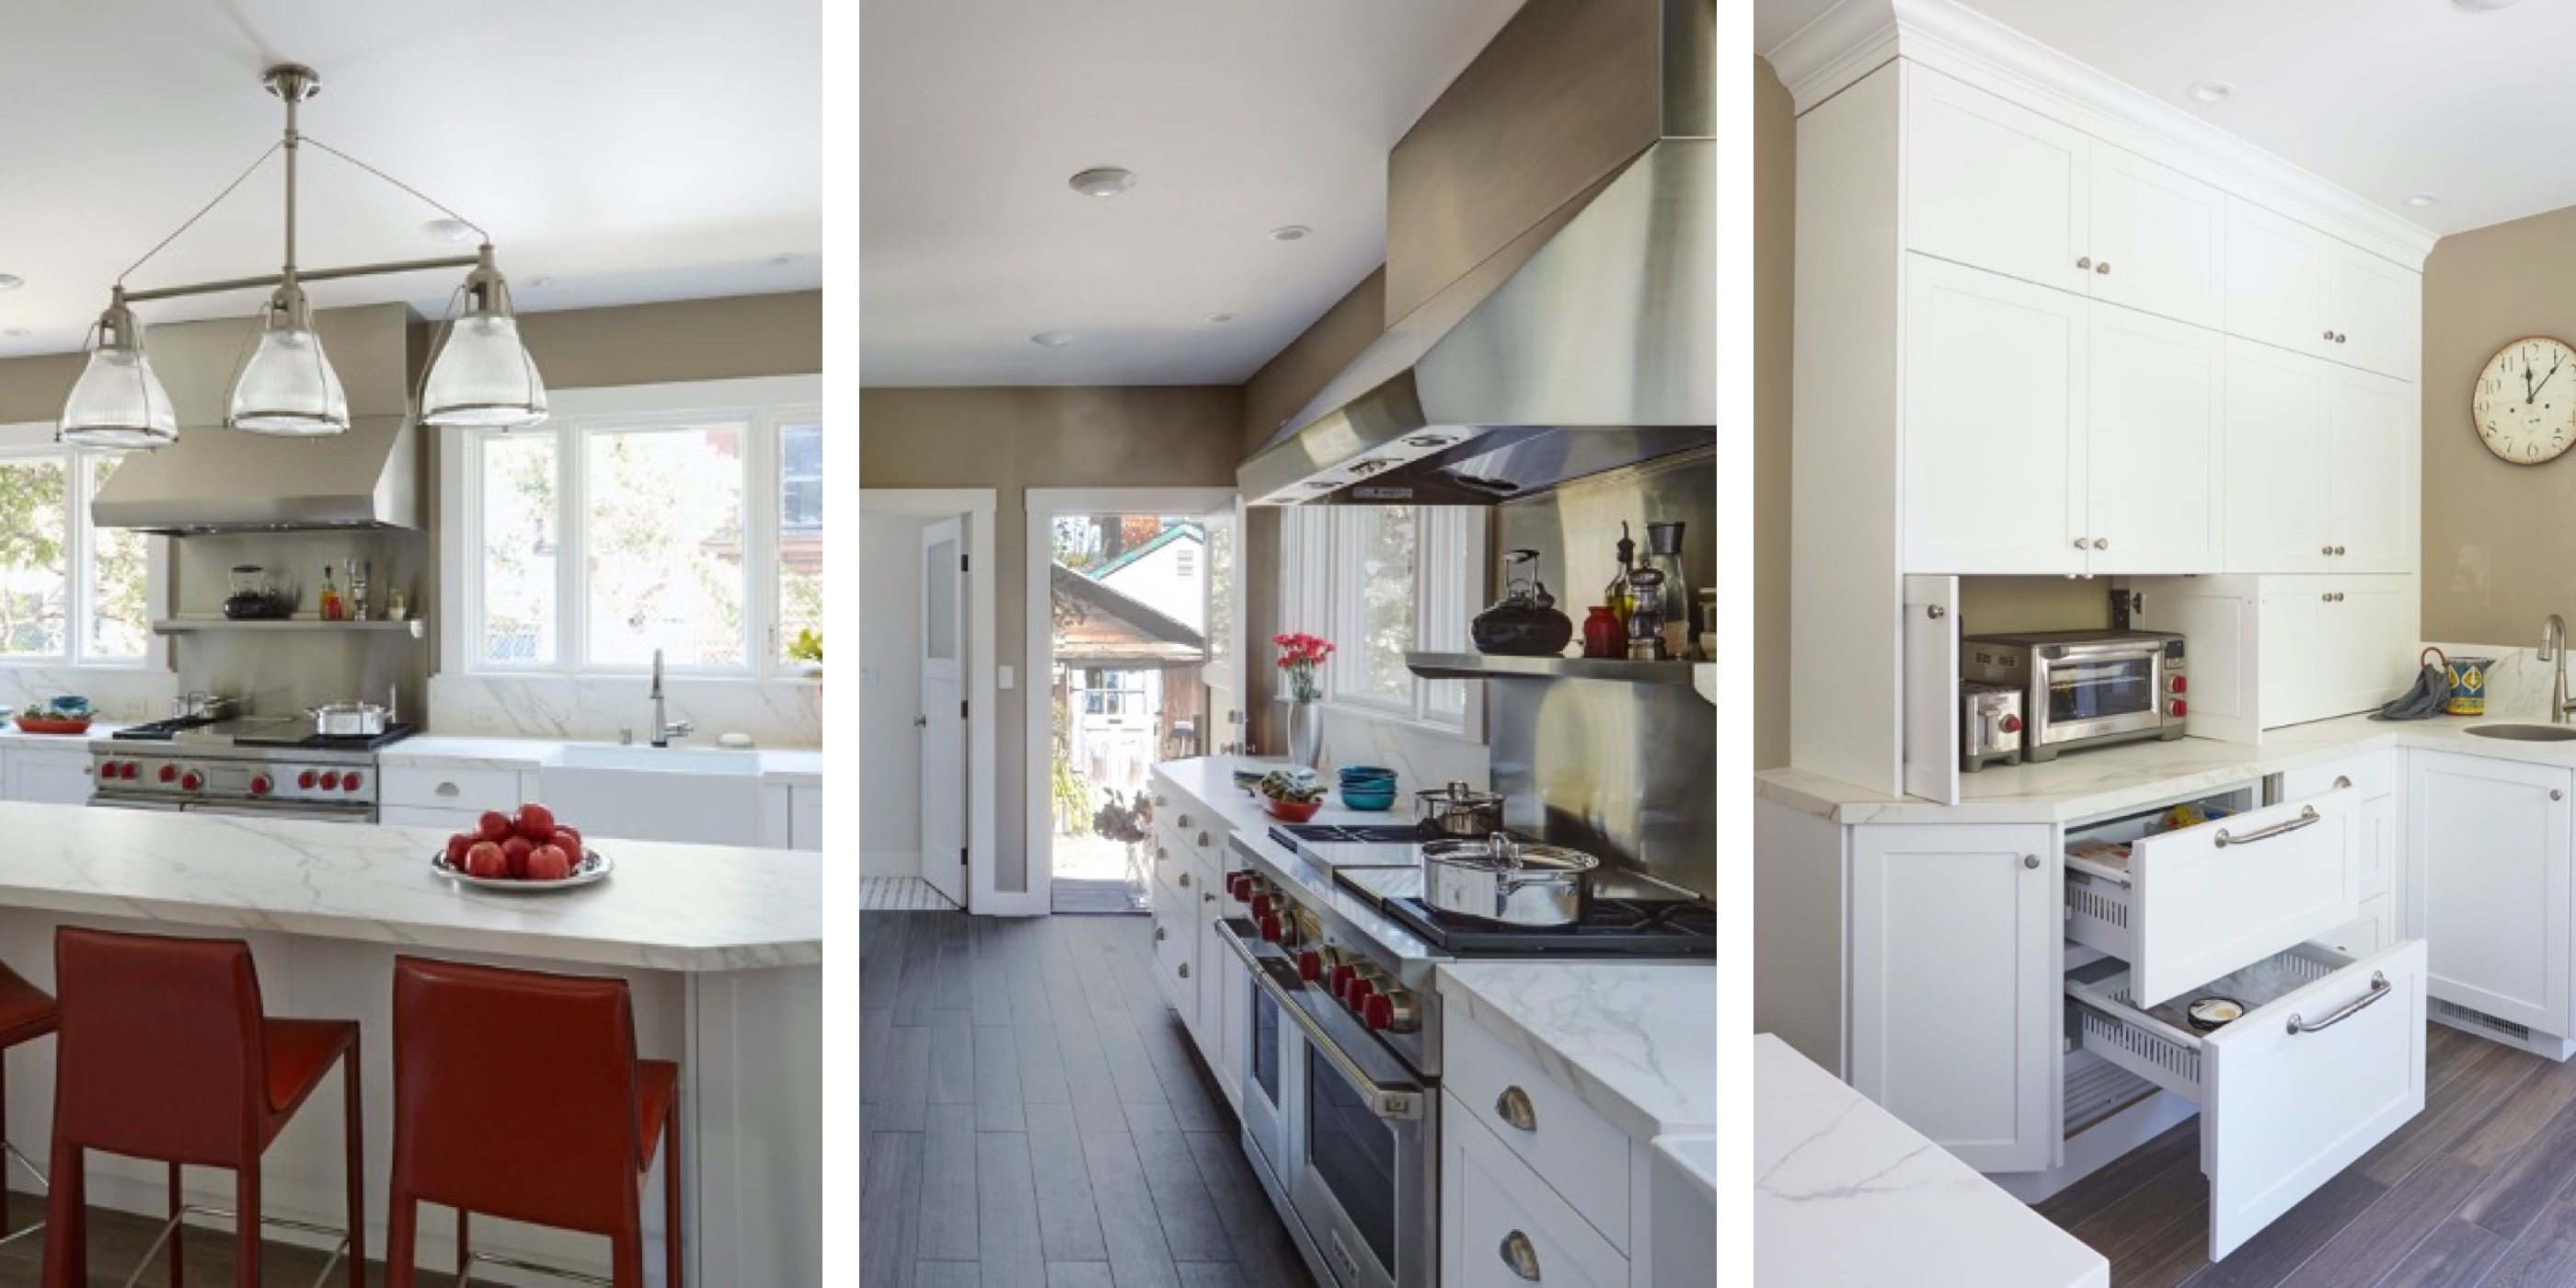 Tips to Transform Your Kitchen and Bath Remodels in the East Bay - Kitchen Renovation - White Quartz Countertops - Custom Kitchens